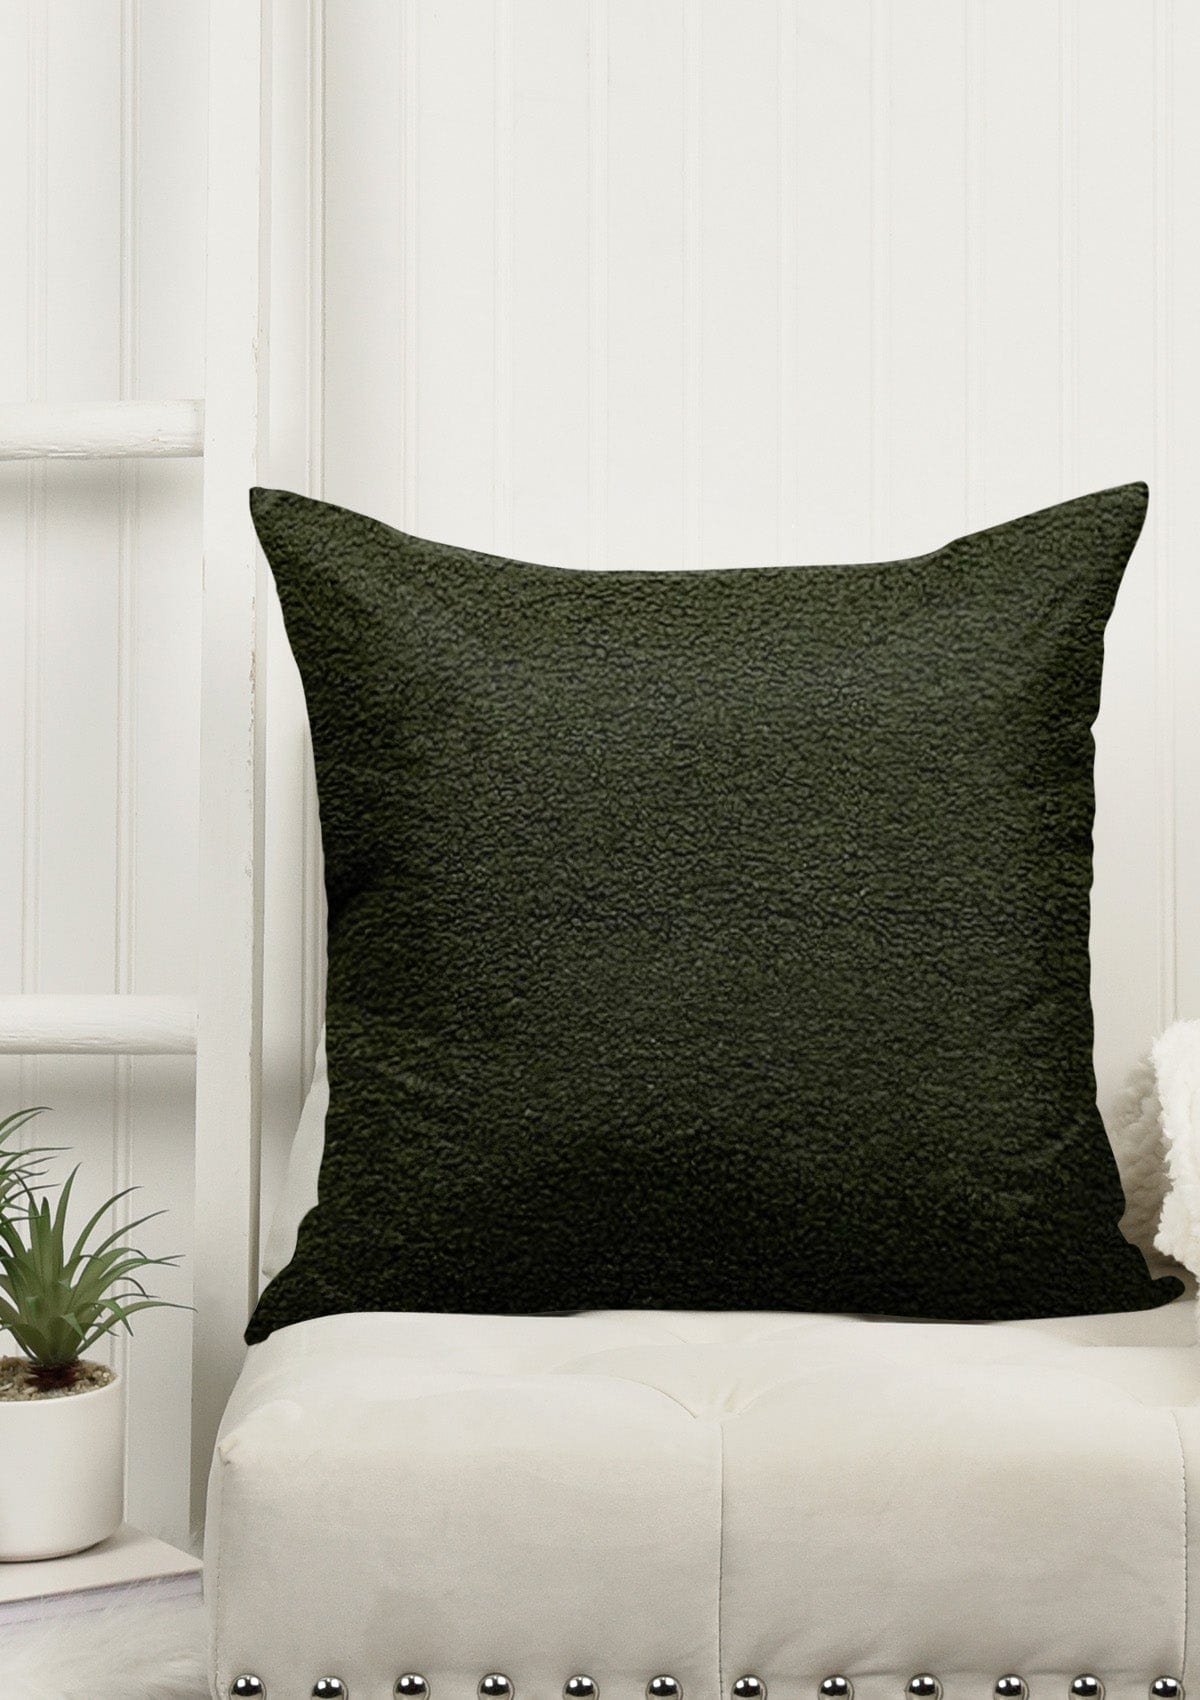  Faux Fur Green Cushion Covers 30x50cm / Dark Green / No thanks - cover only